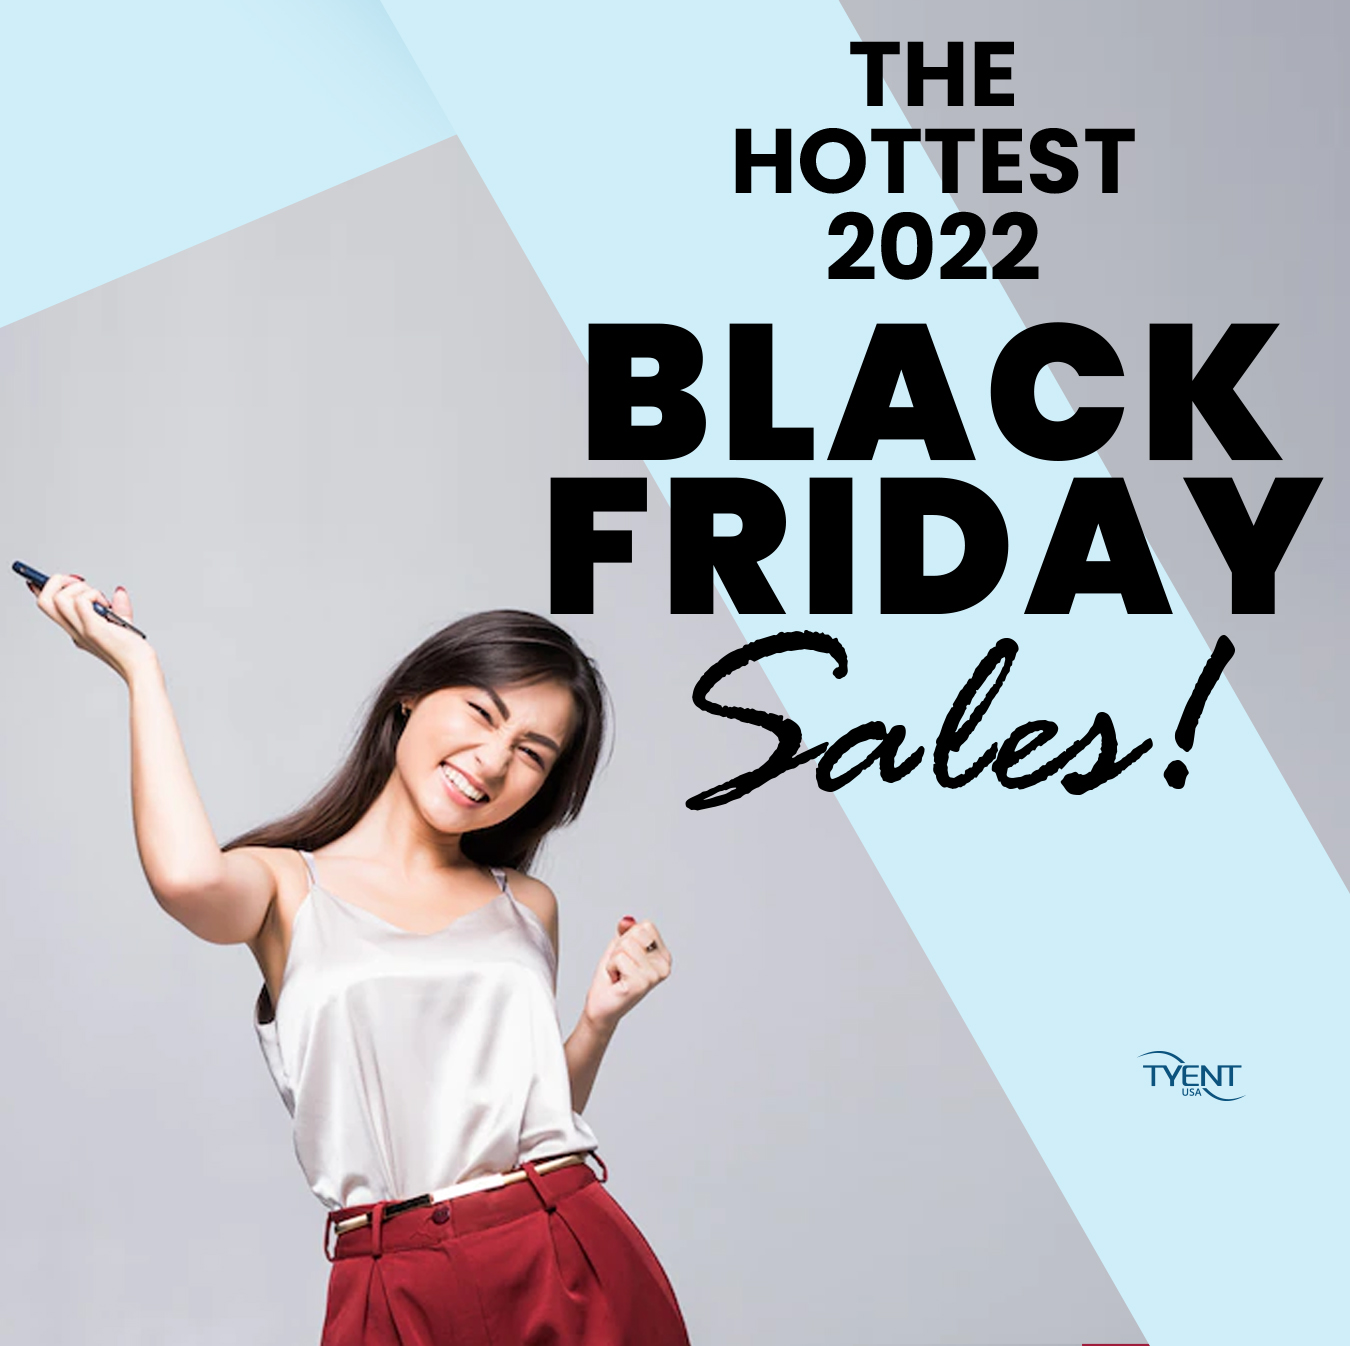 The Hottest 2022 Black Friday Sales!